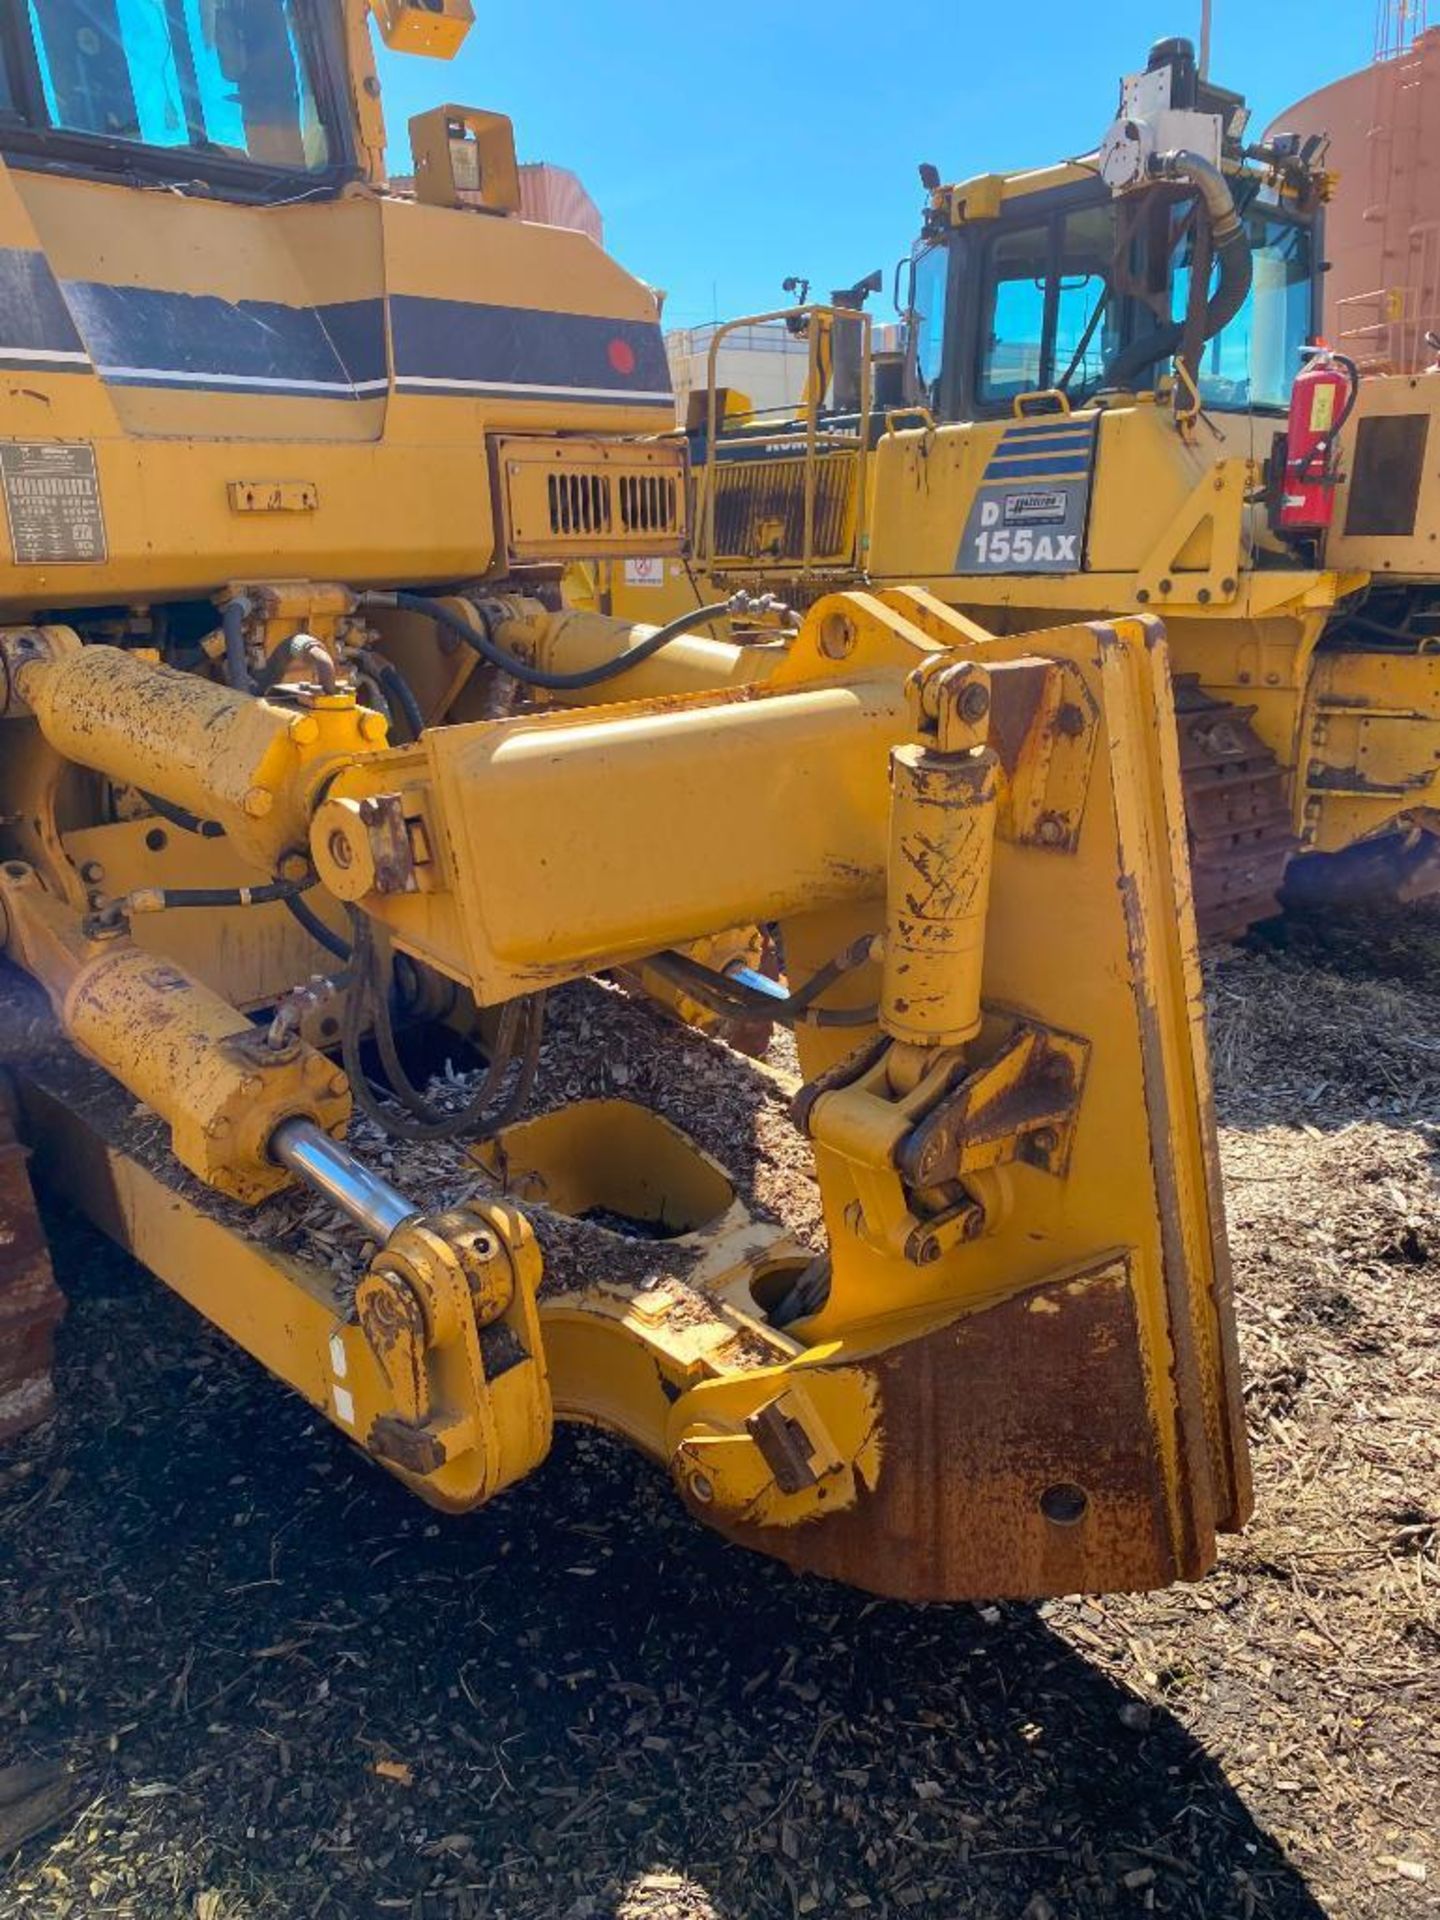 2001 Caterpillar D8R Dozer, Pin No. 6YZ00526, 27,721 Hours, 3406E Engine, S/N BET00698, 24" Wide Tra - Image 8 of 24